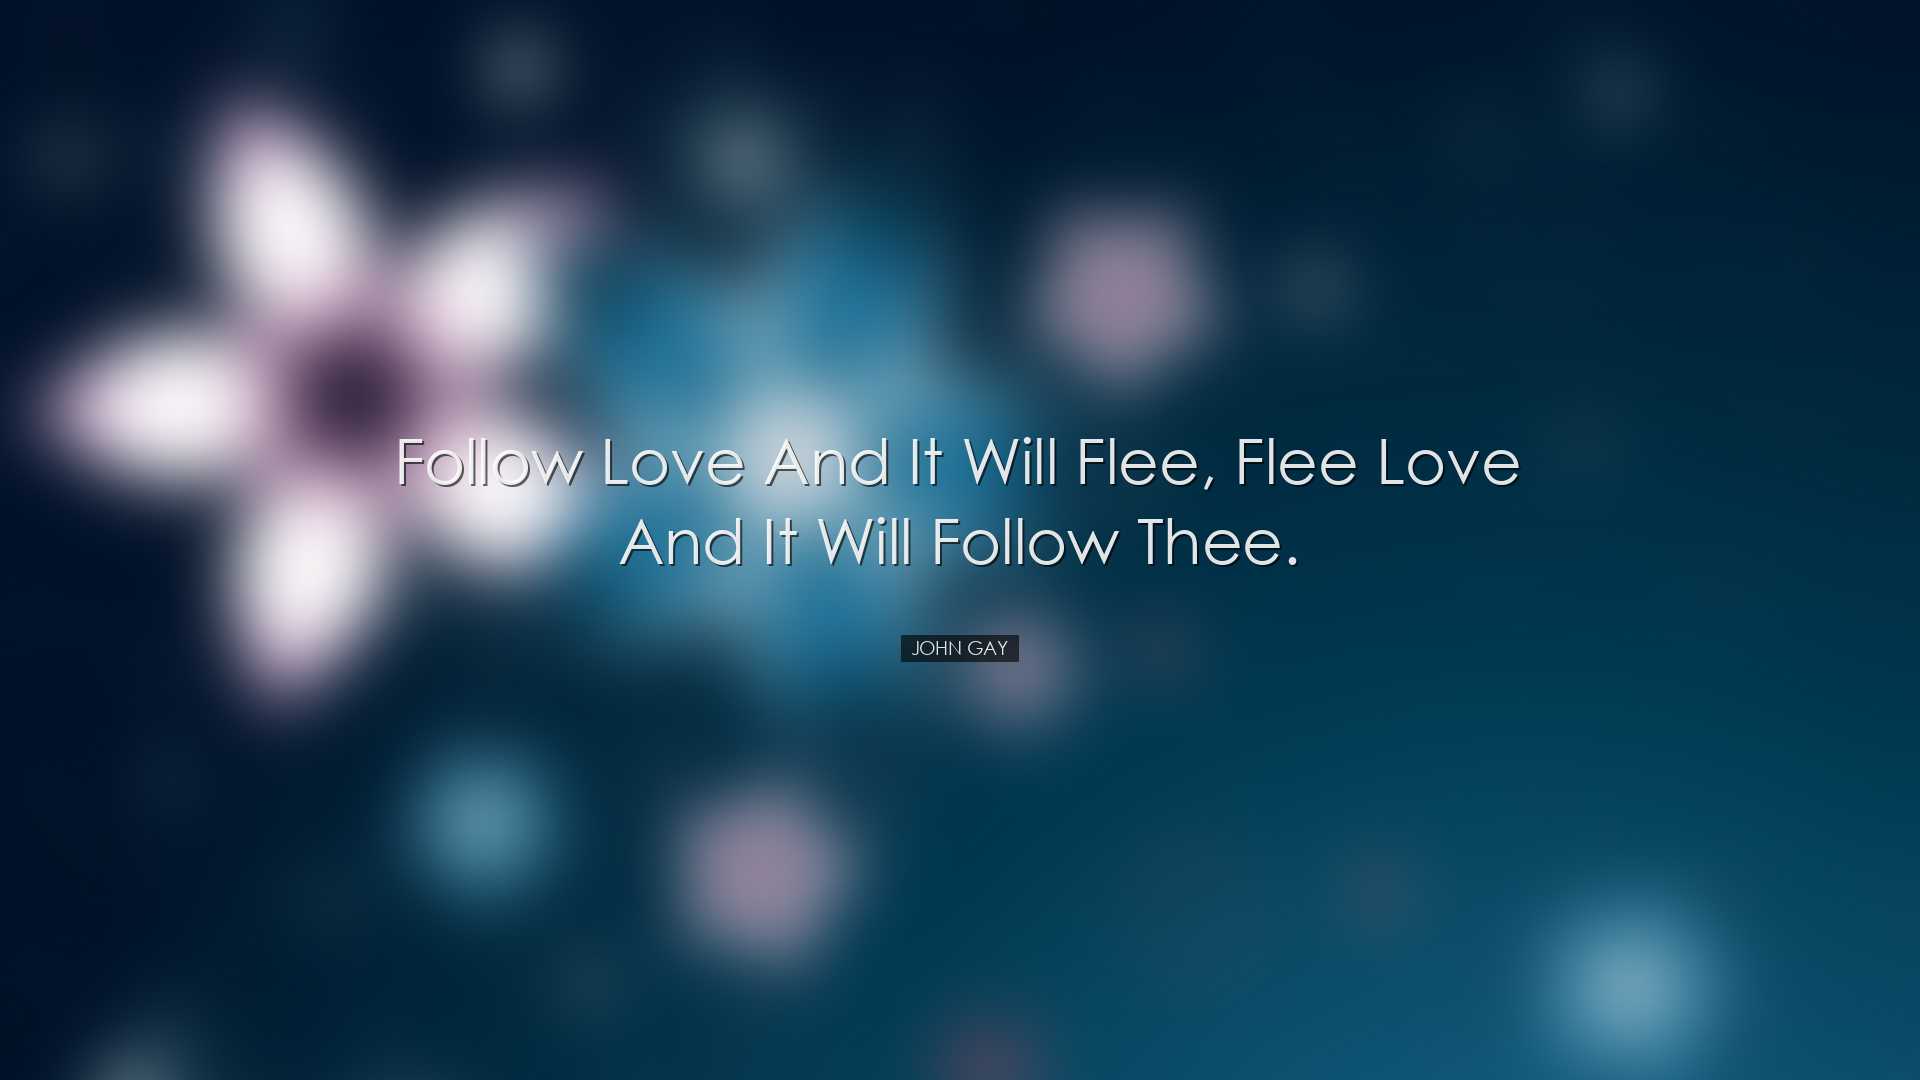 Follow love and it will flee, flee love and it will follow thee. -